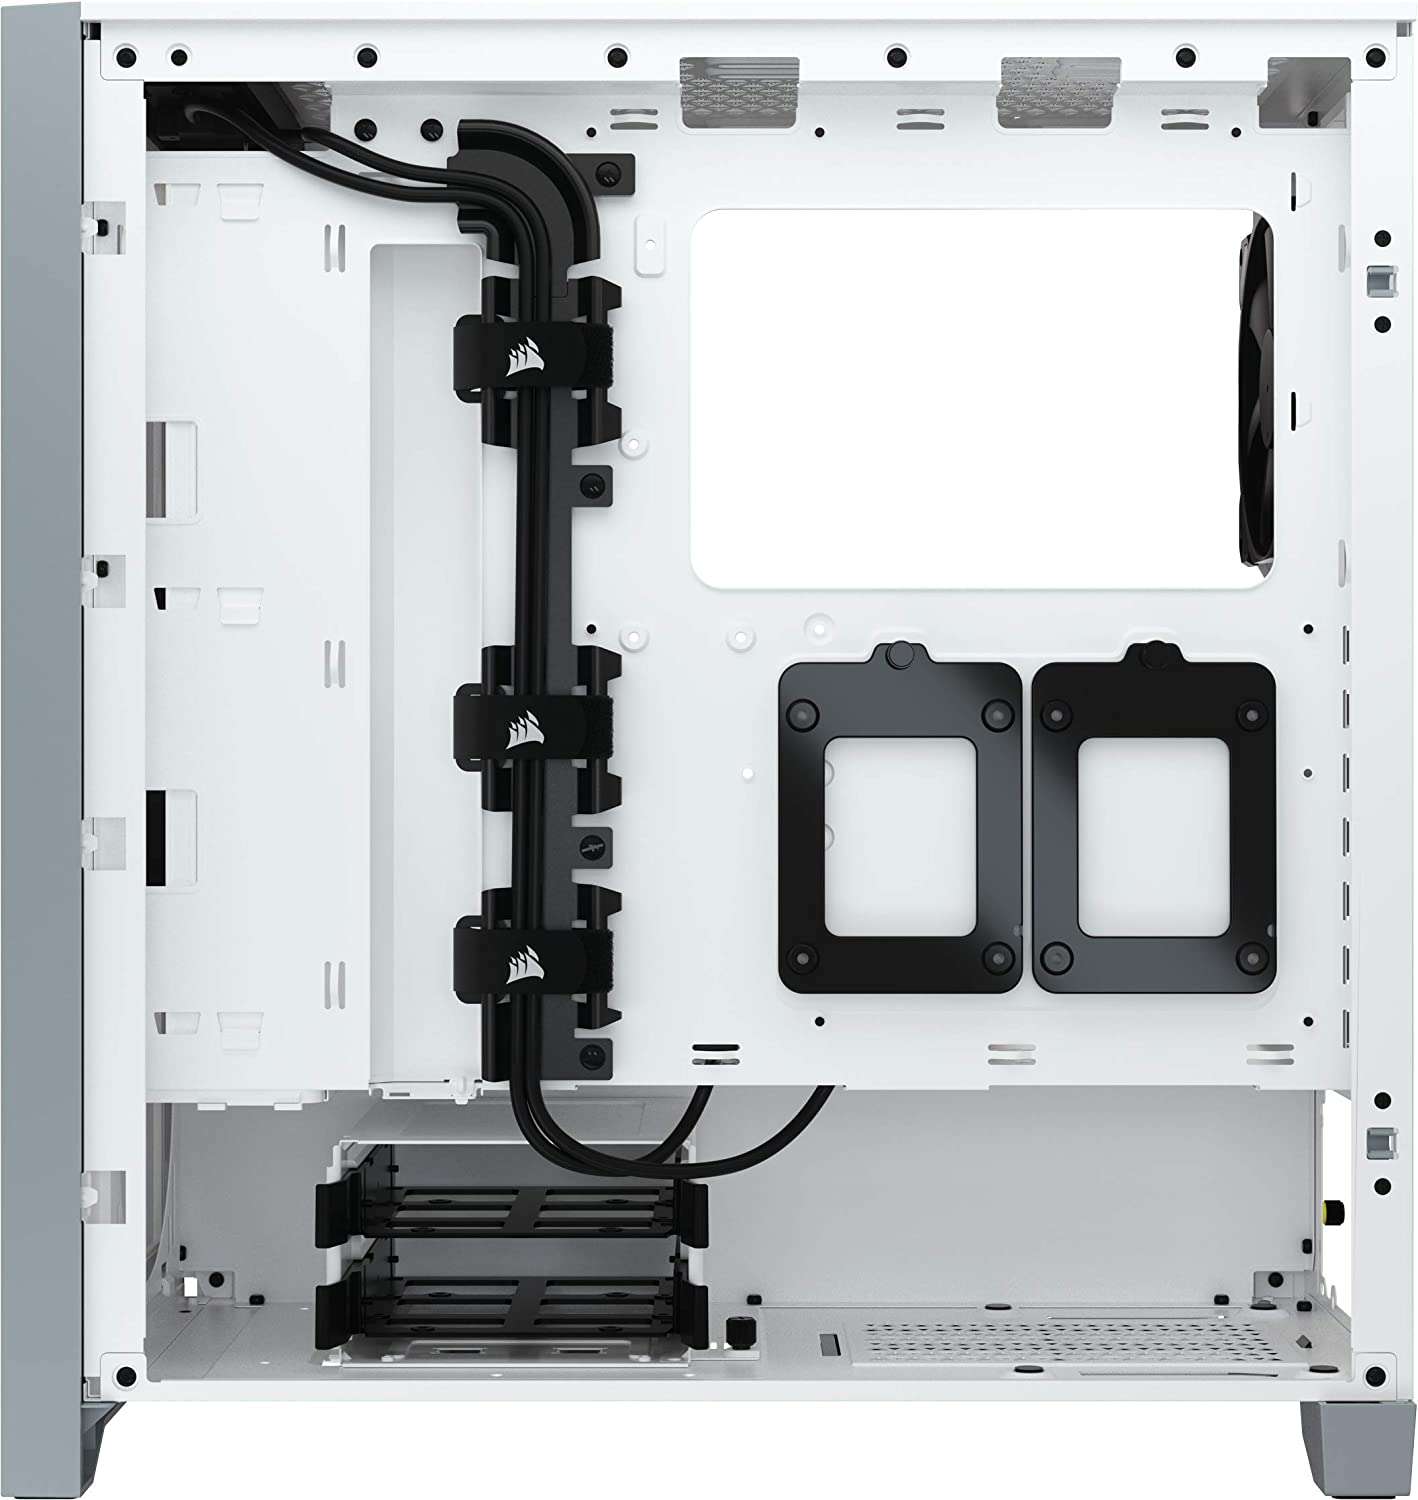 CORSAIR 4000D AIRFLOW  Tempered Glass Mid-Tower ATX Case